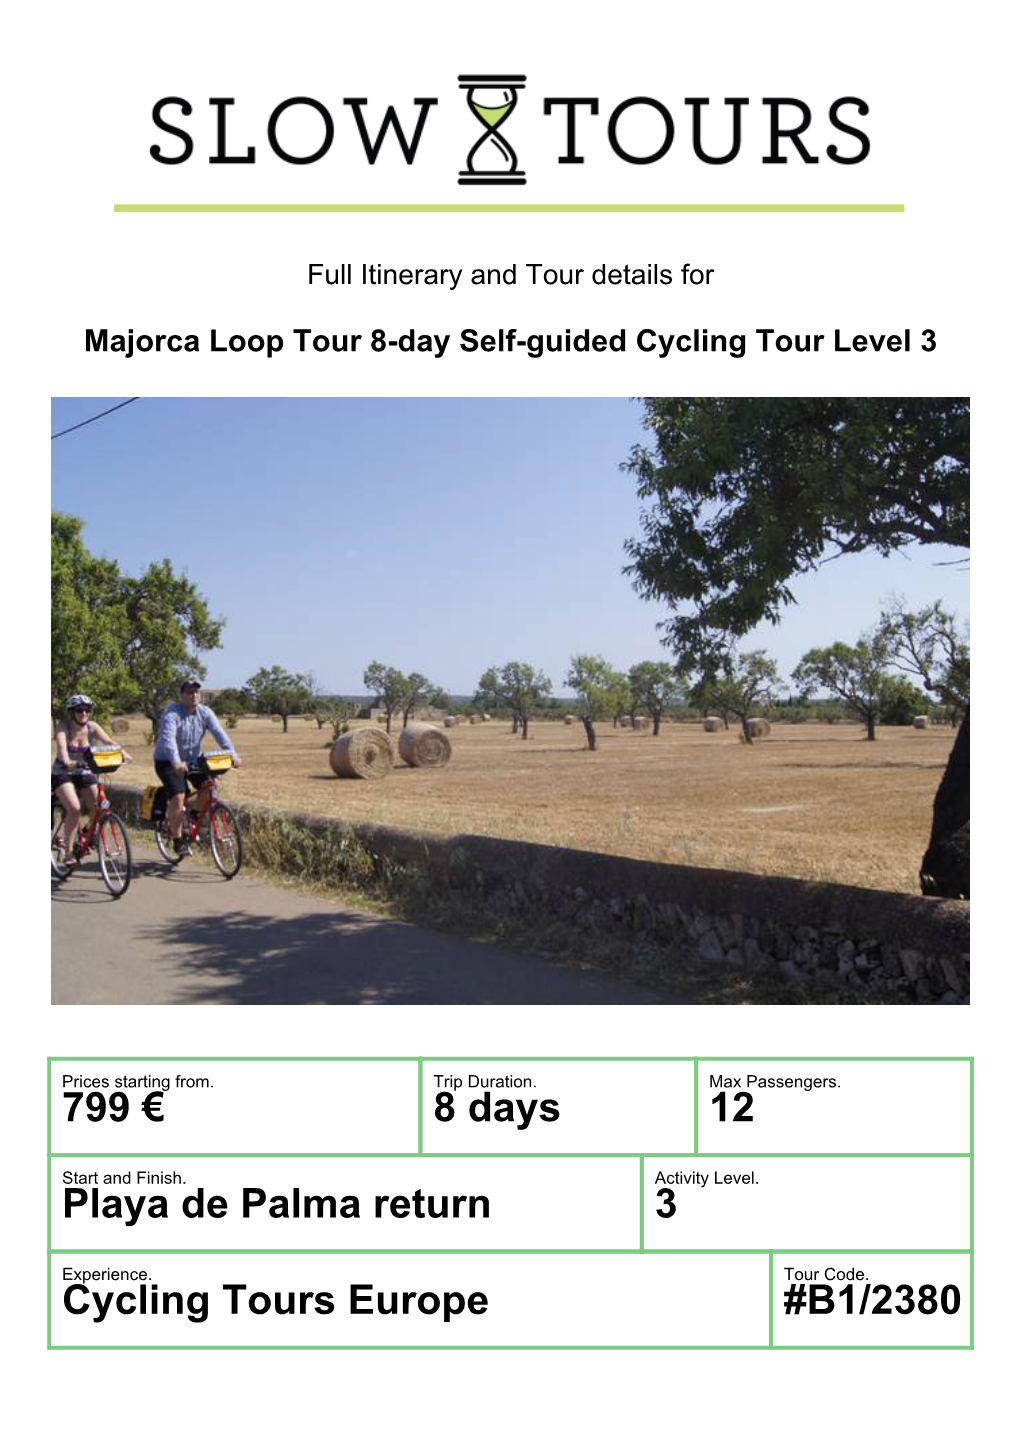 Cycling Tours Europe #B1/2380 Majorca Loop Tour 8-Day Self-Guided Cycling Tour Level 3